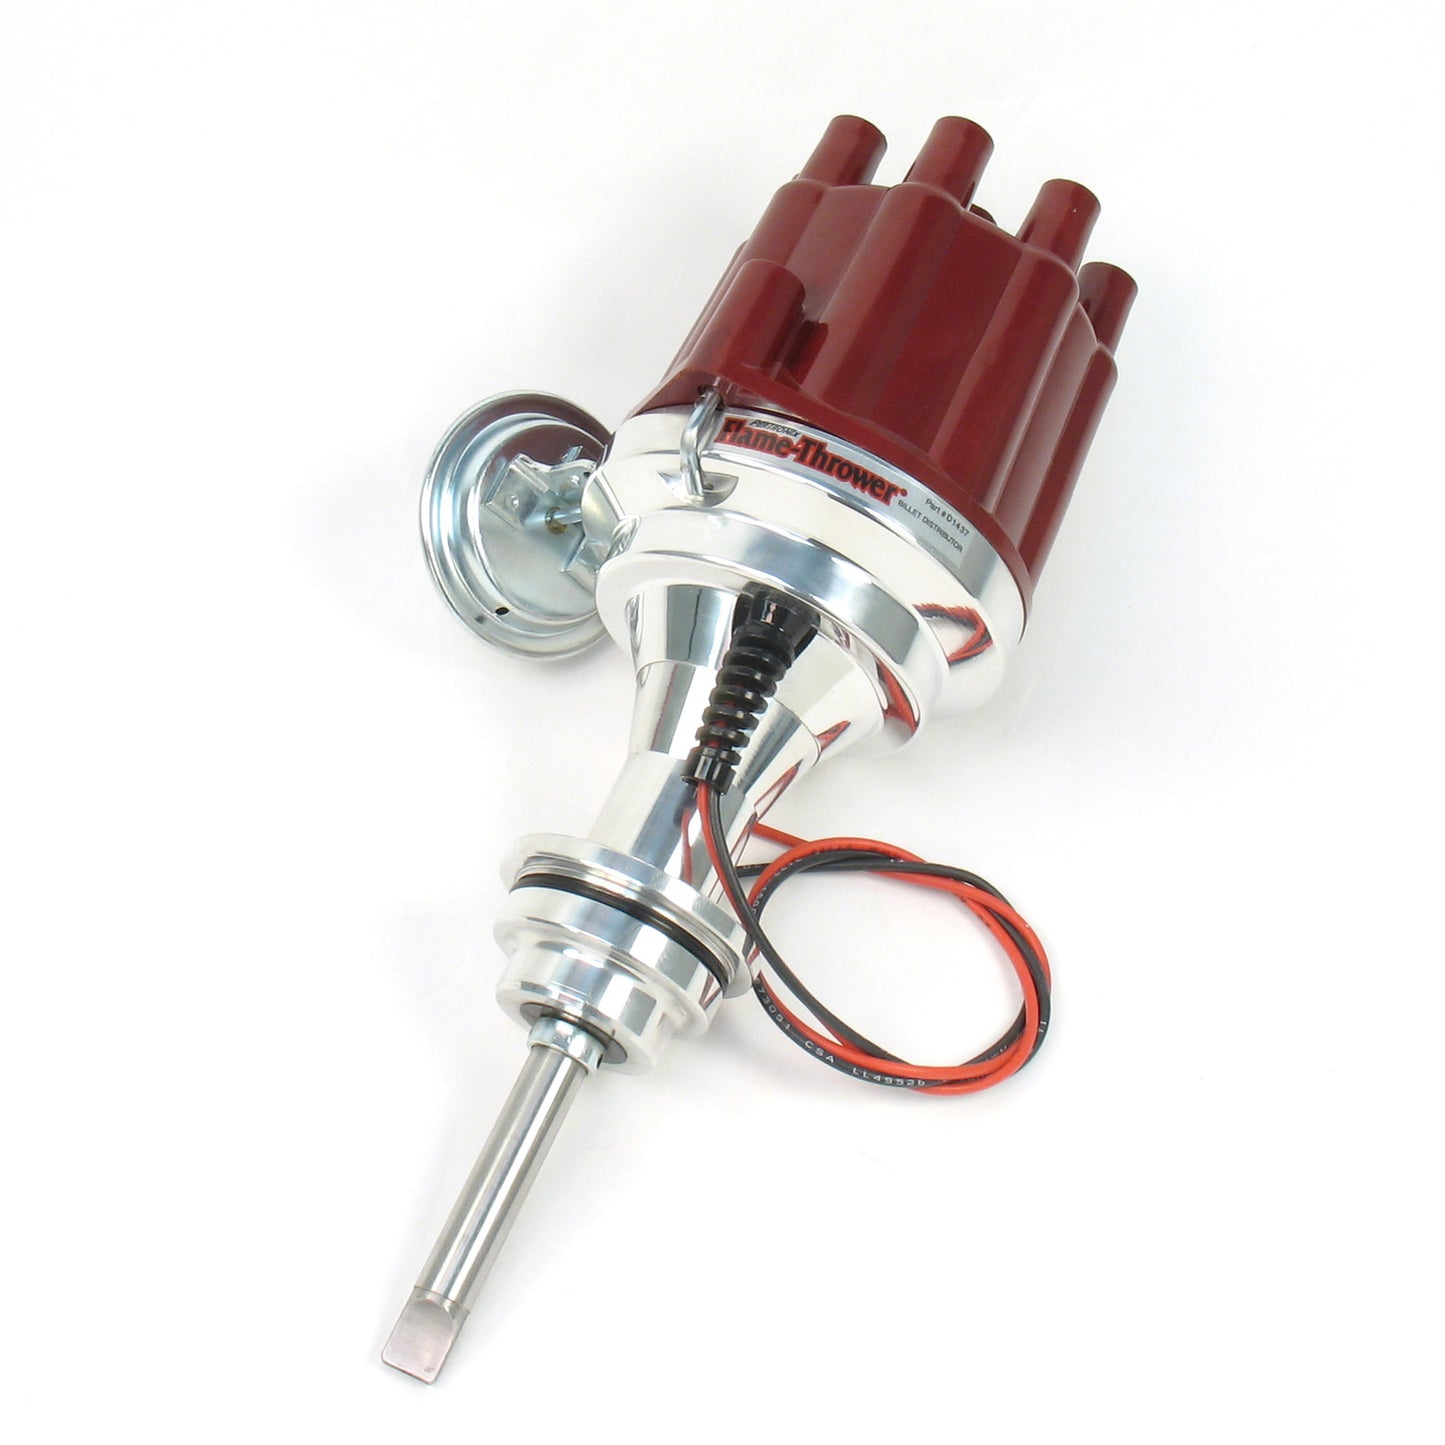 PerTronix D143701 Flame-Thrower Electronic Distributor Billet Chrysler/Dodge/Plymouth 426-440 Plug and Play with Ignitor II Technology Vacuum Advance Red Cap